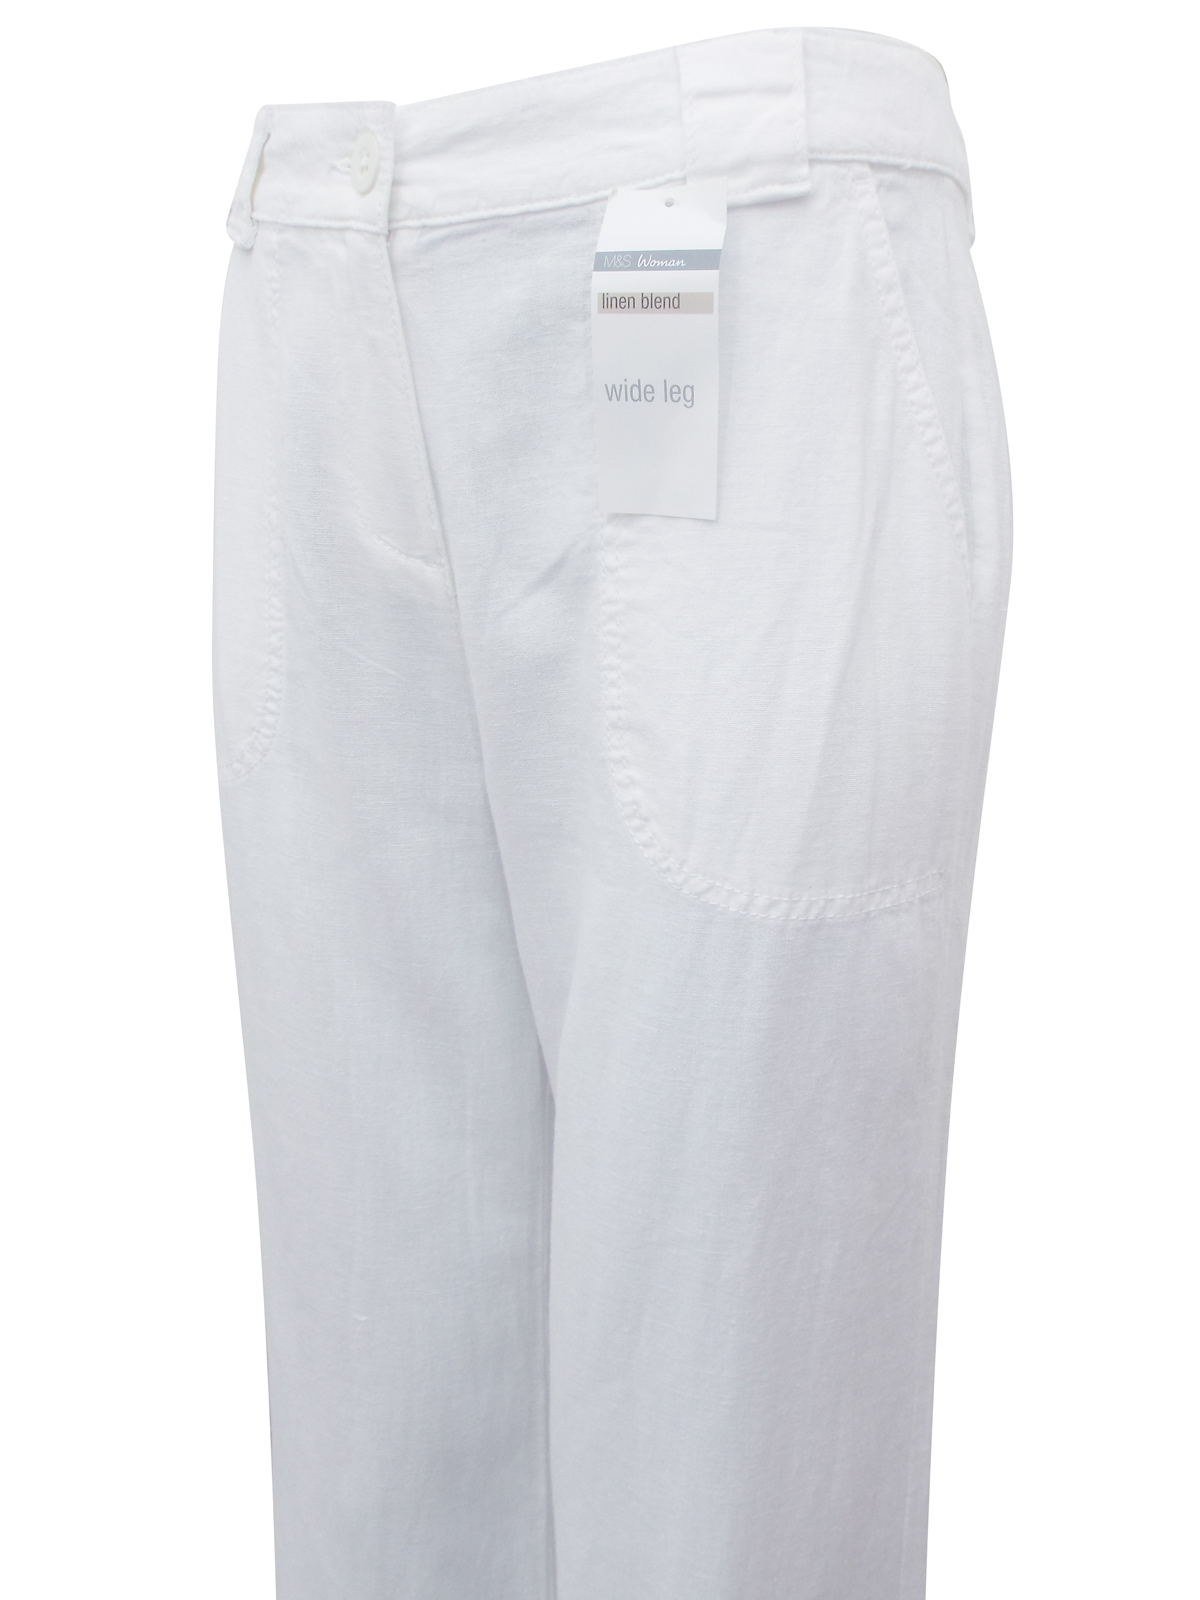 white trousers size 22